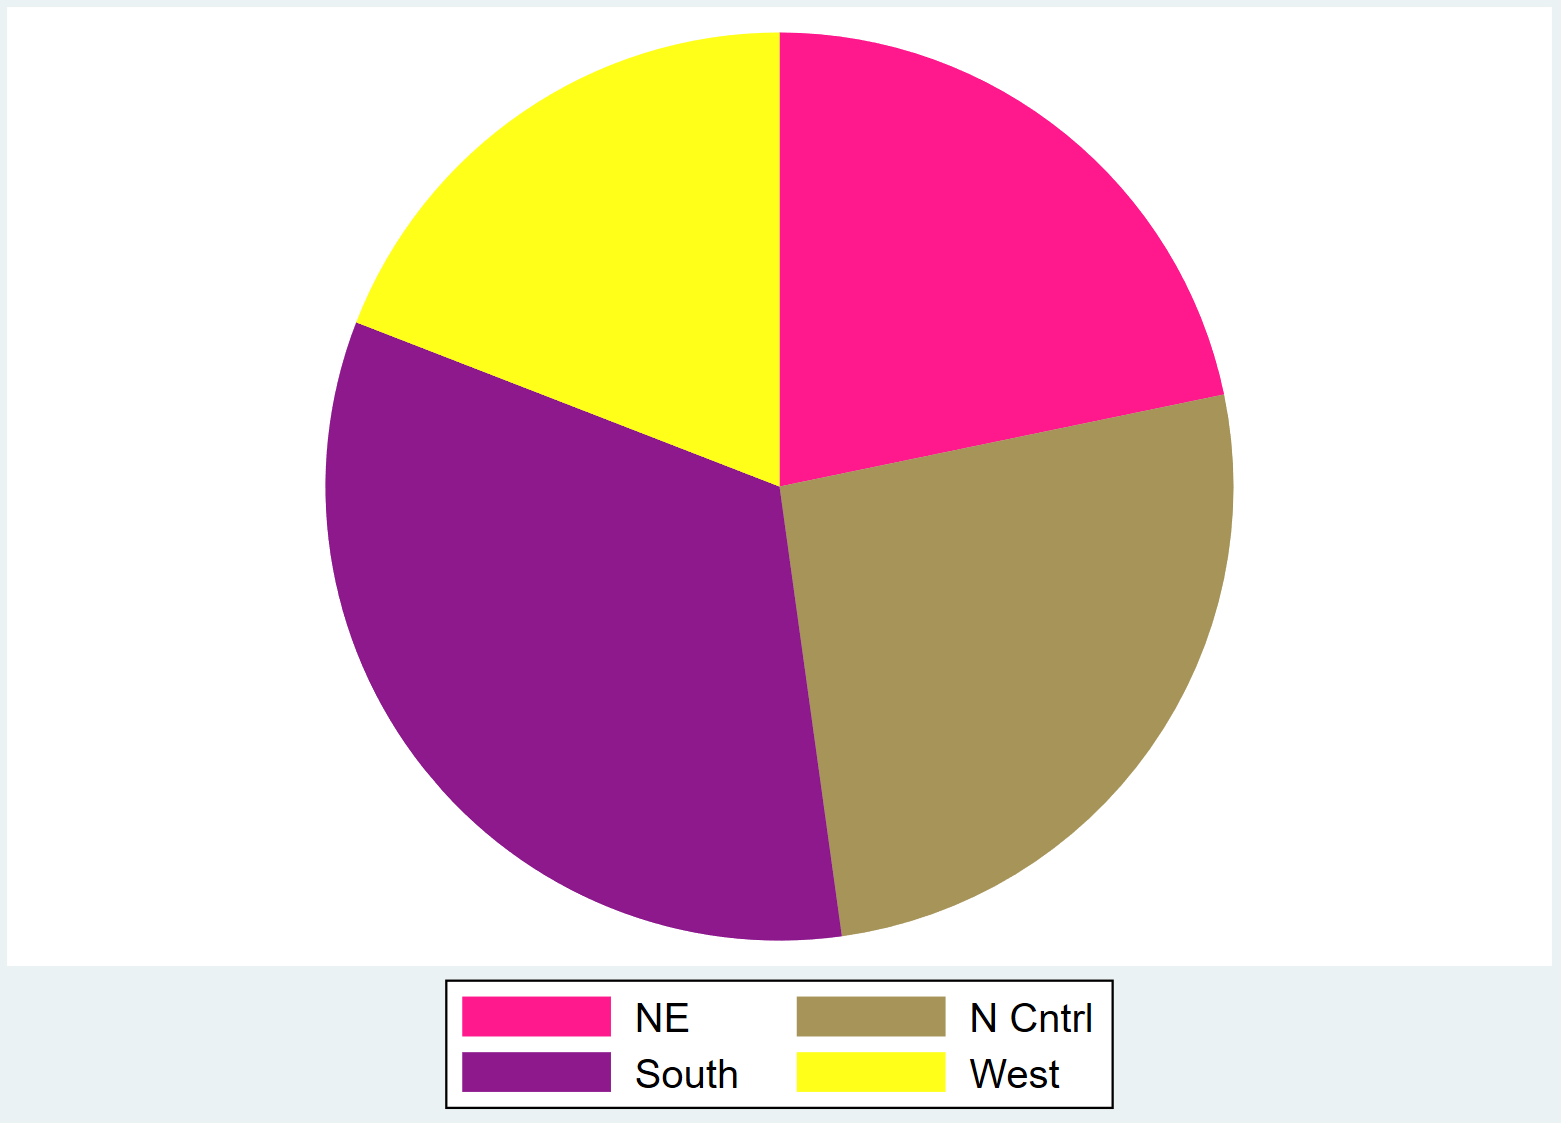 Pie chart in Stata with specified colors